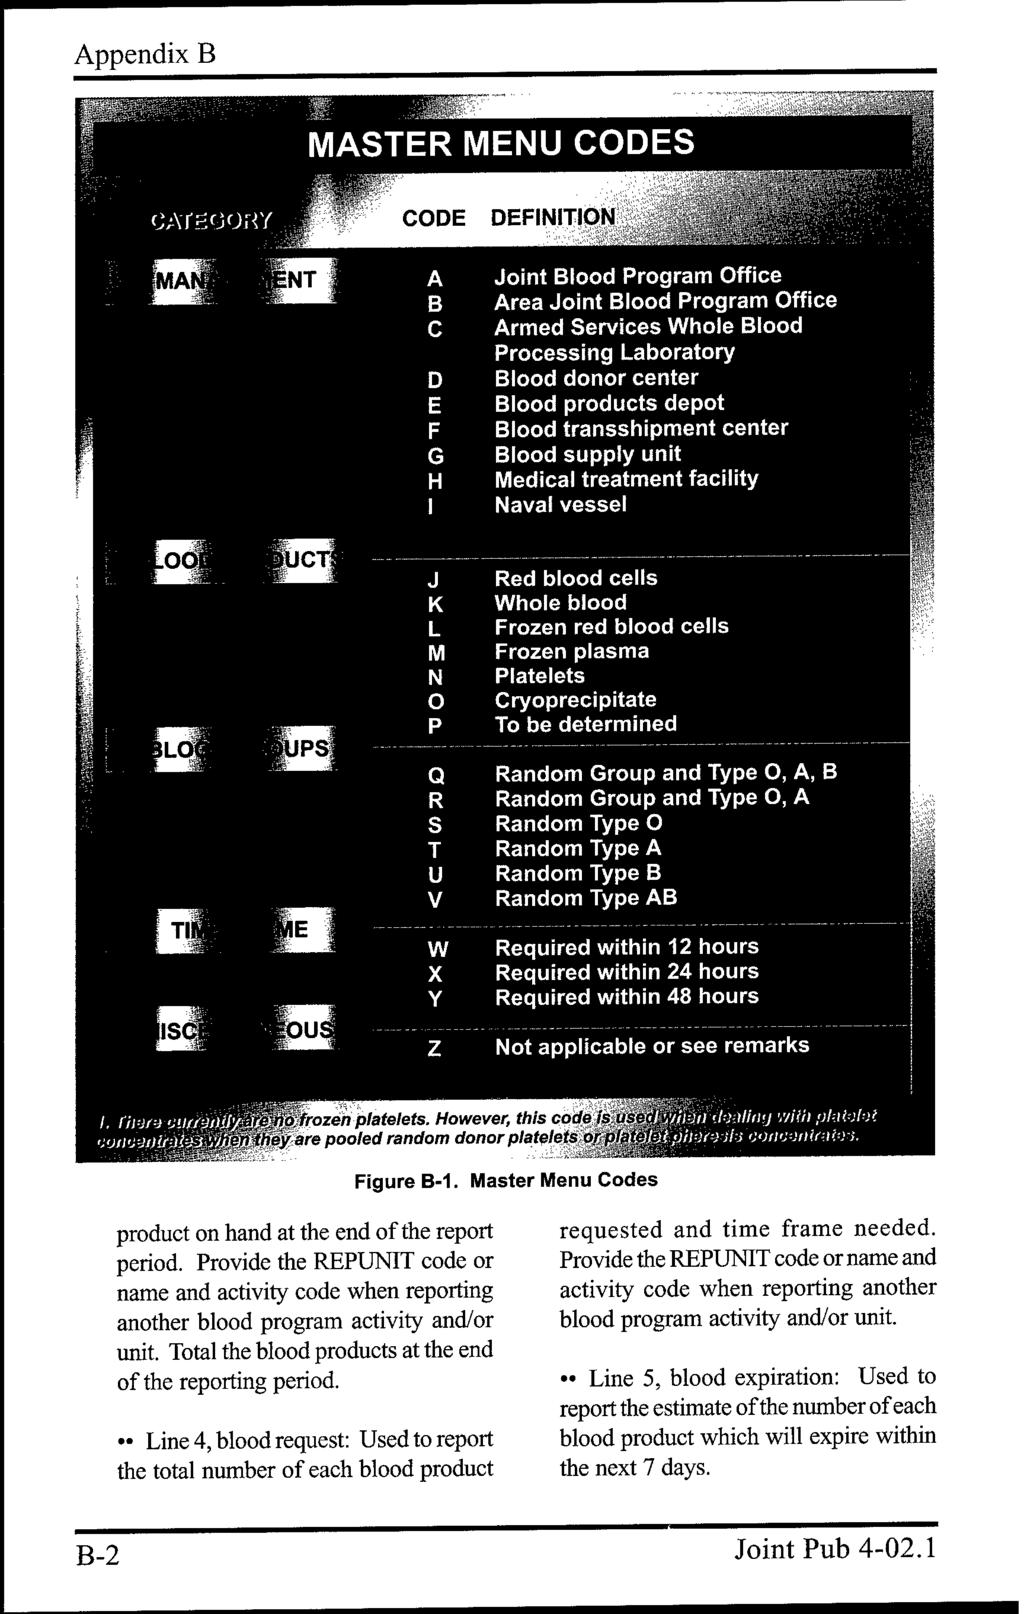 Appendix B Figure B-1. Master Menu Codes product on hand at the end of the report period. Provide the REPUNIT code or name and activity code when reporting another blood program activity and/or unit.